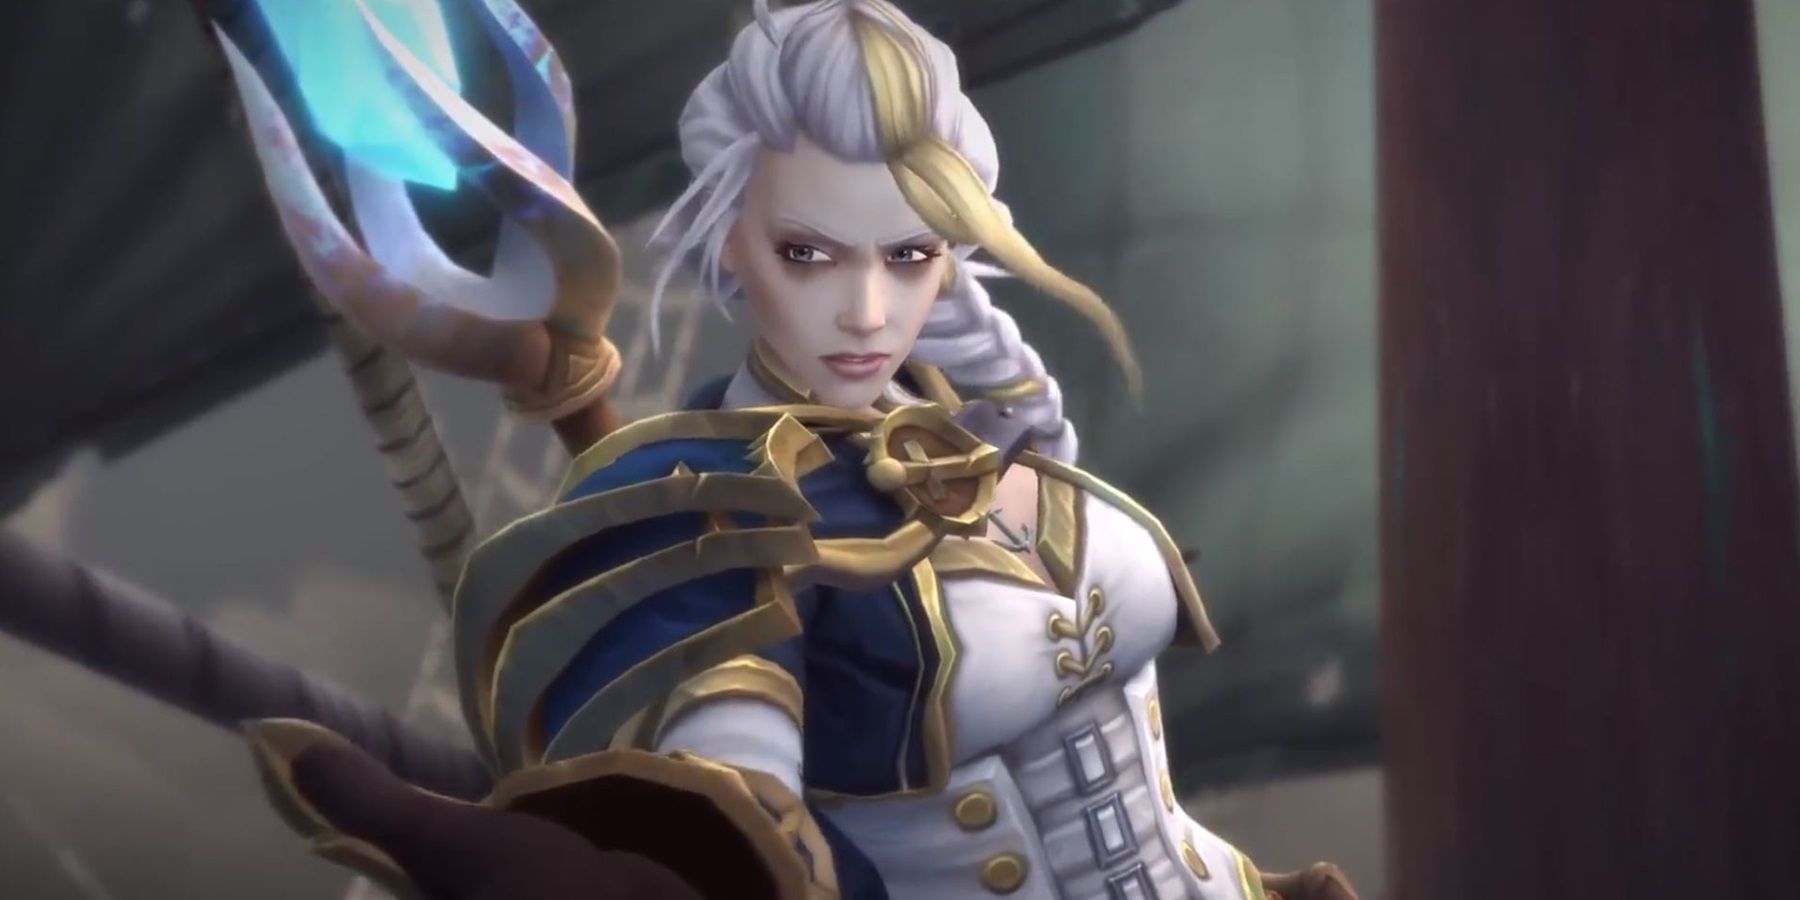 world of warcraft characters who should get the jaina proudmoore treatment